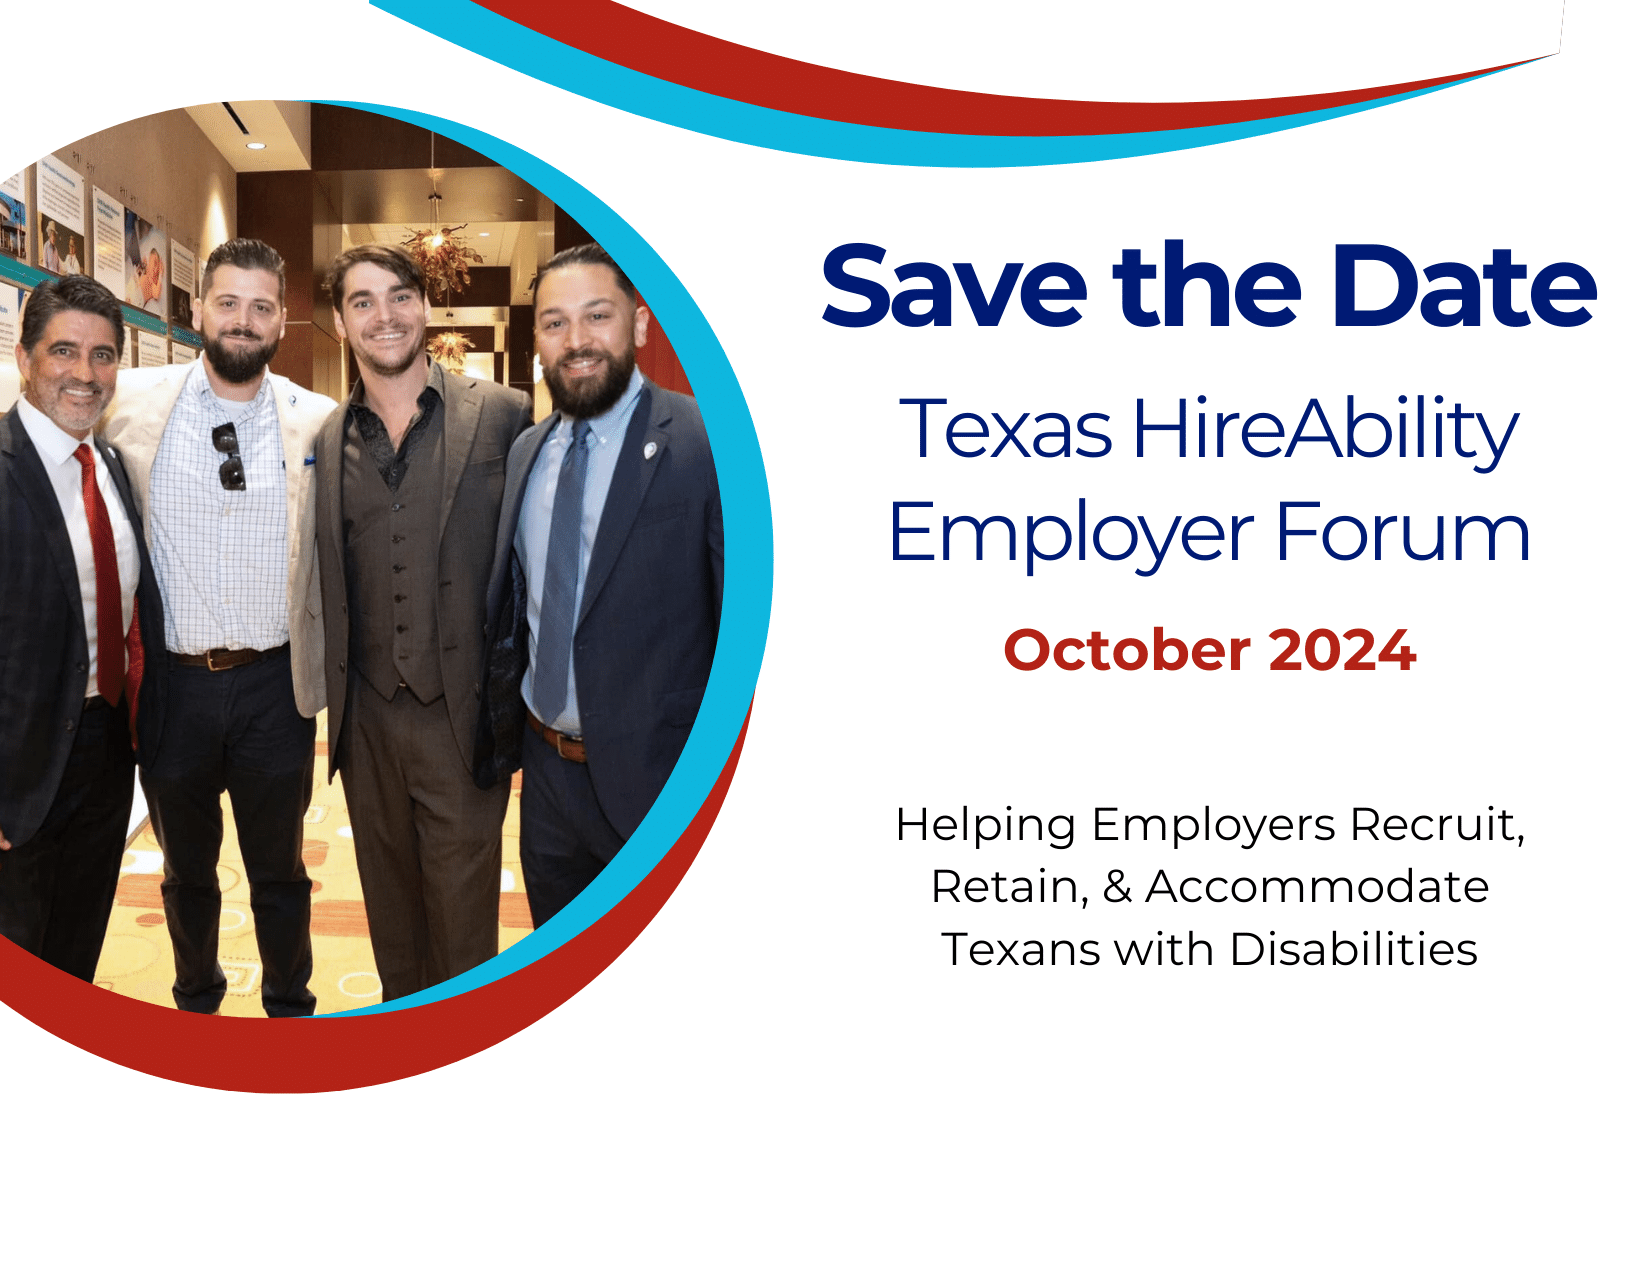 Save the Date Texas HireAbility Employer Forum - October 2024. Helping Employers Recruit, Retain, & Accommodate Texans with Disabilities